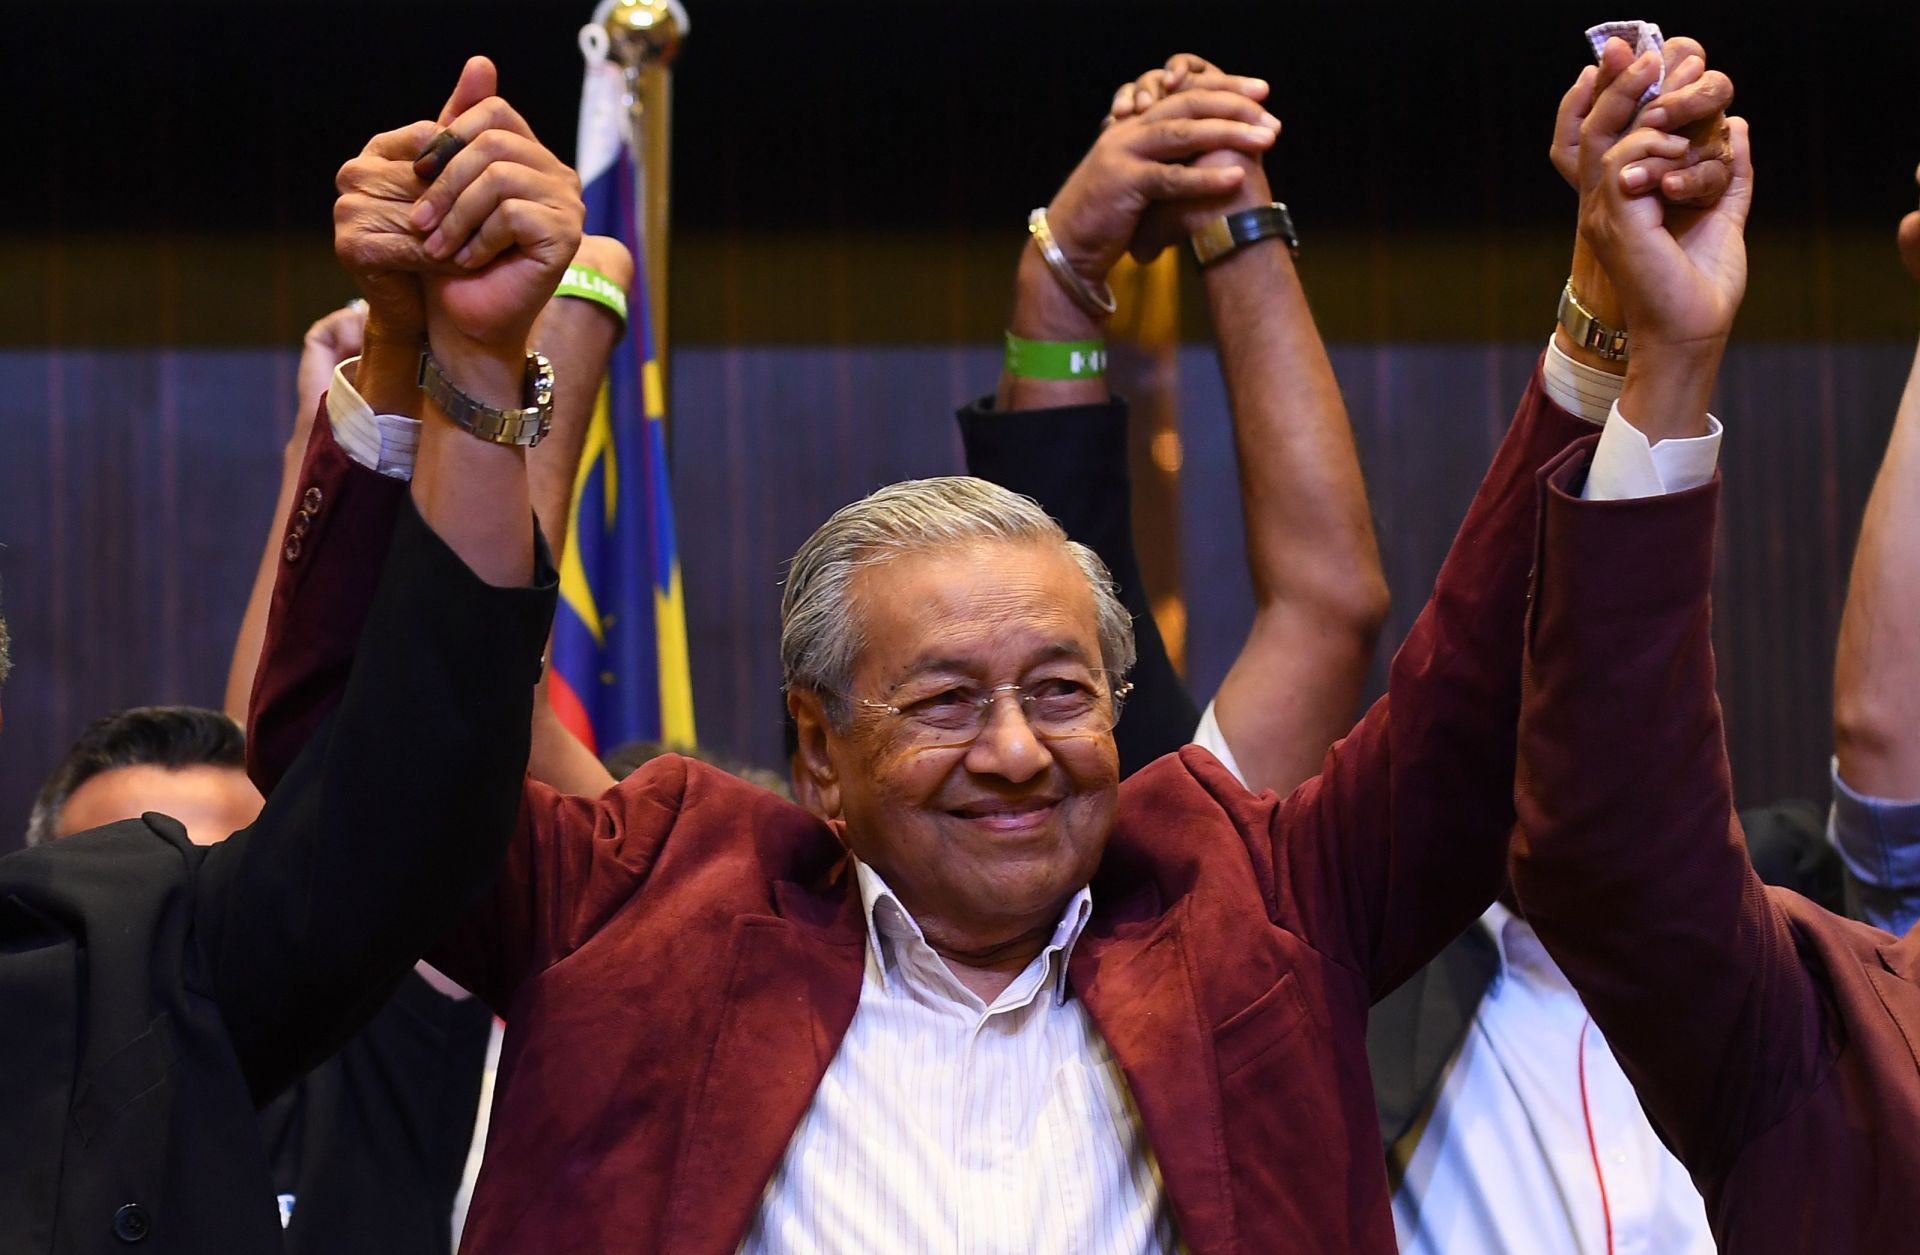 Mahathir Mohamad, who served as Malaysia's prime minister from 1981-2003, celebrates his victory and return to power in the country's election in May 2018.